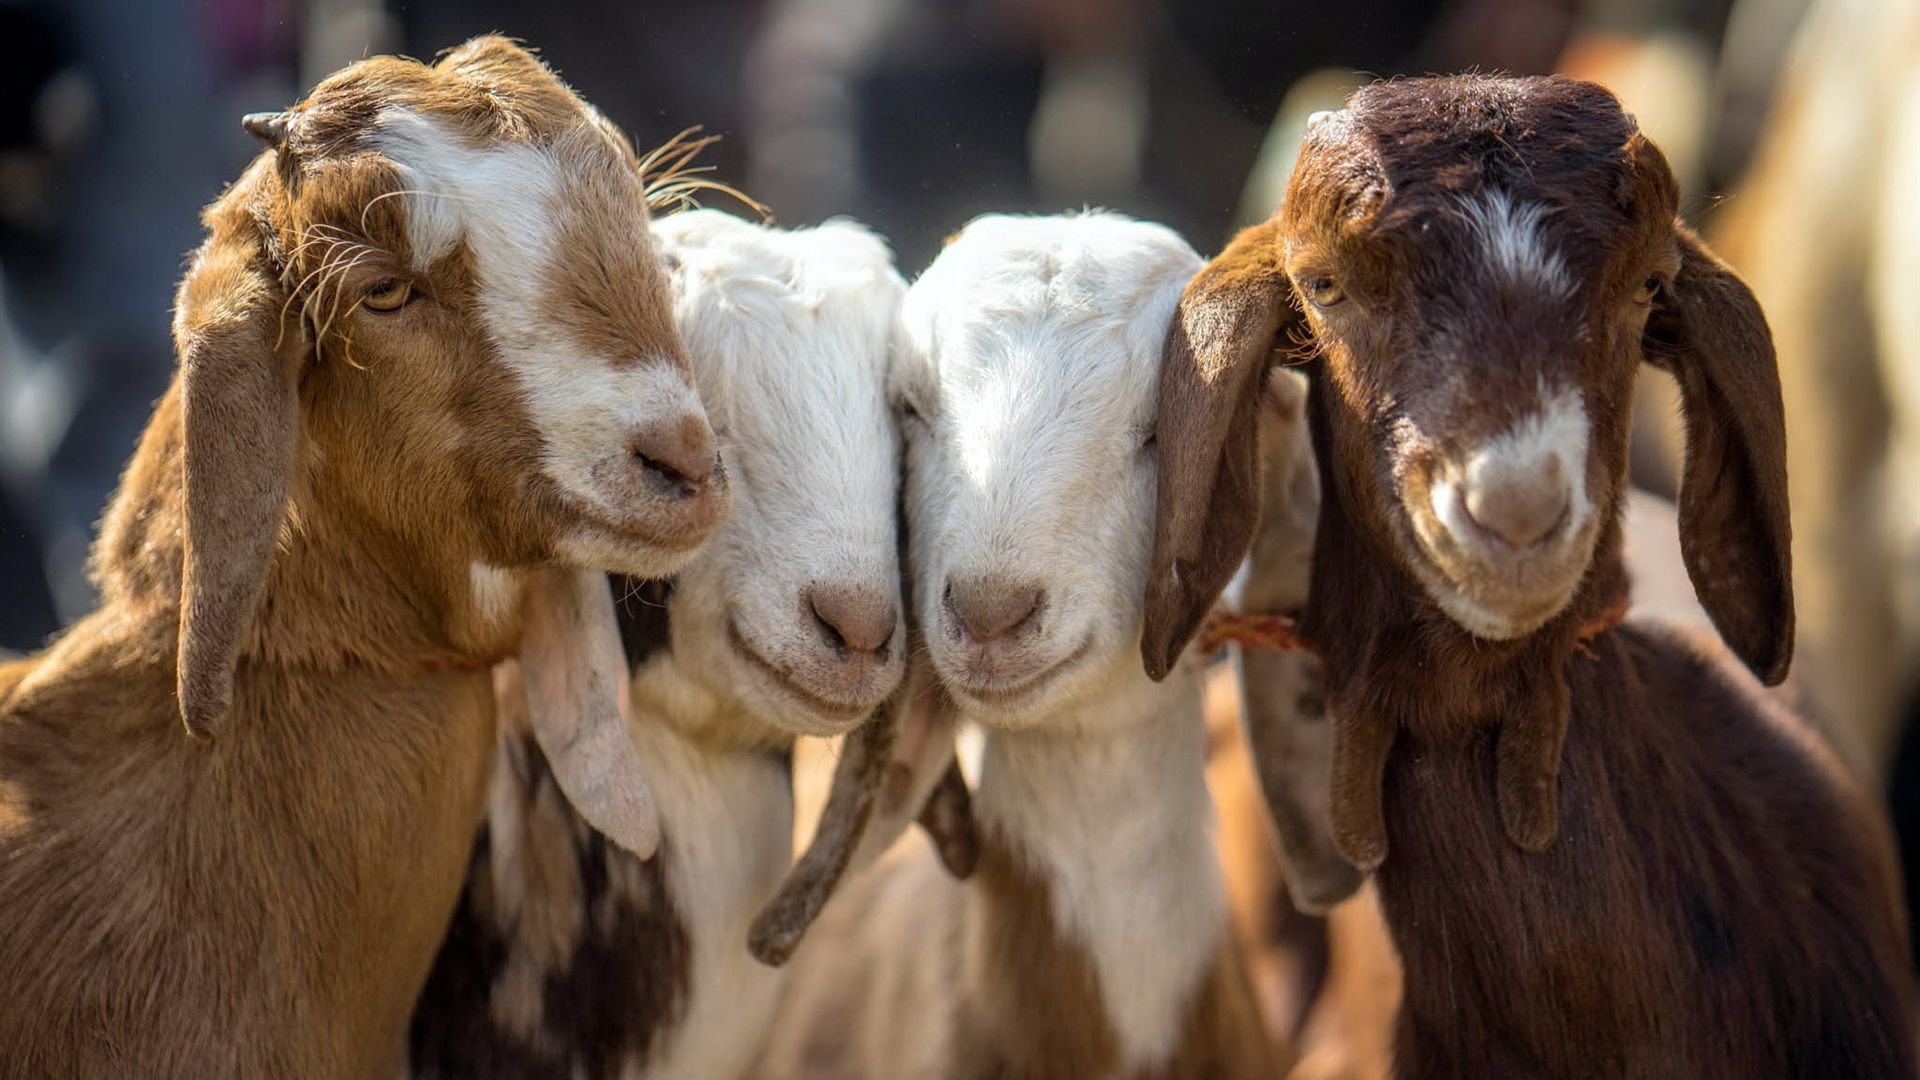 Wallpaper Four goats 1920x1200 HD Picture, Image